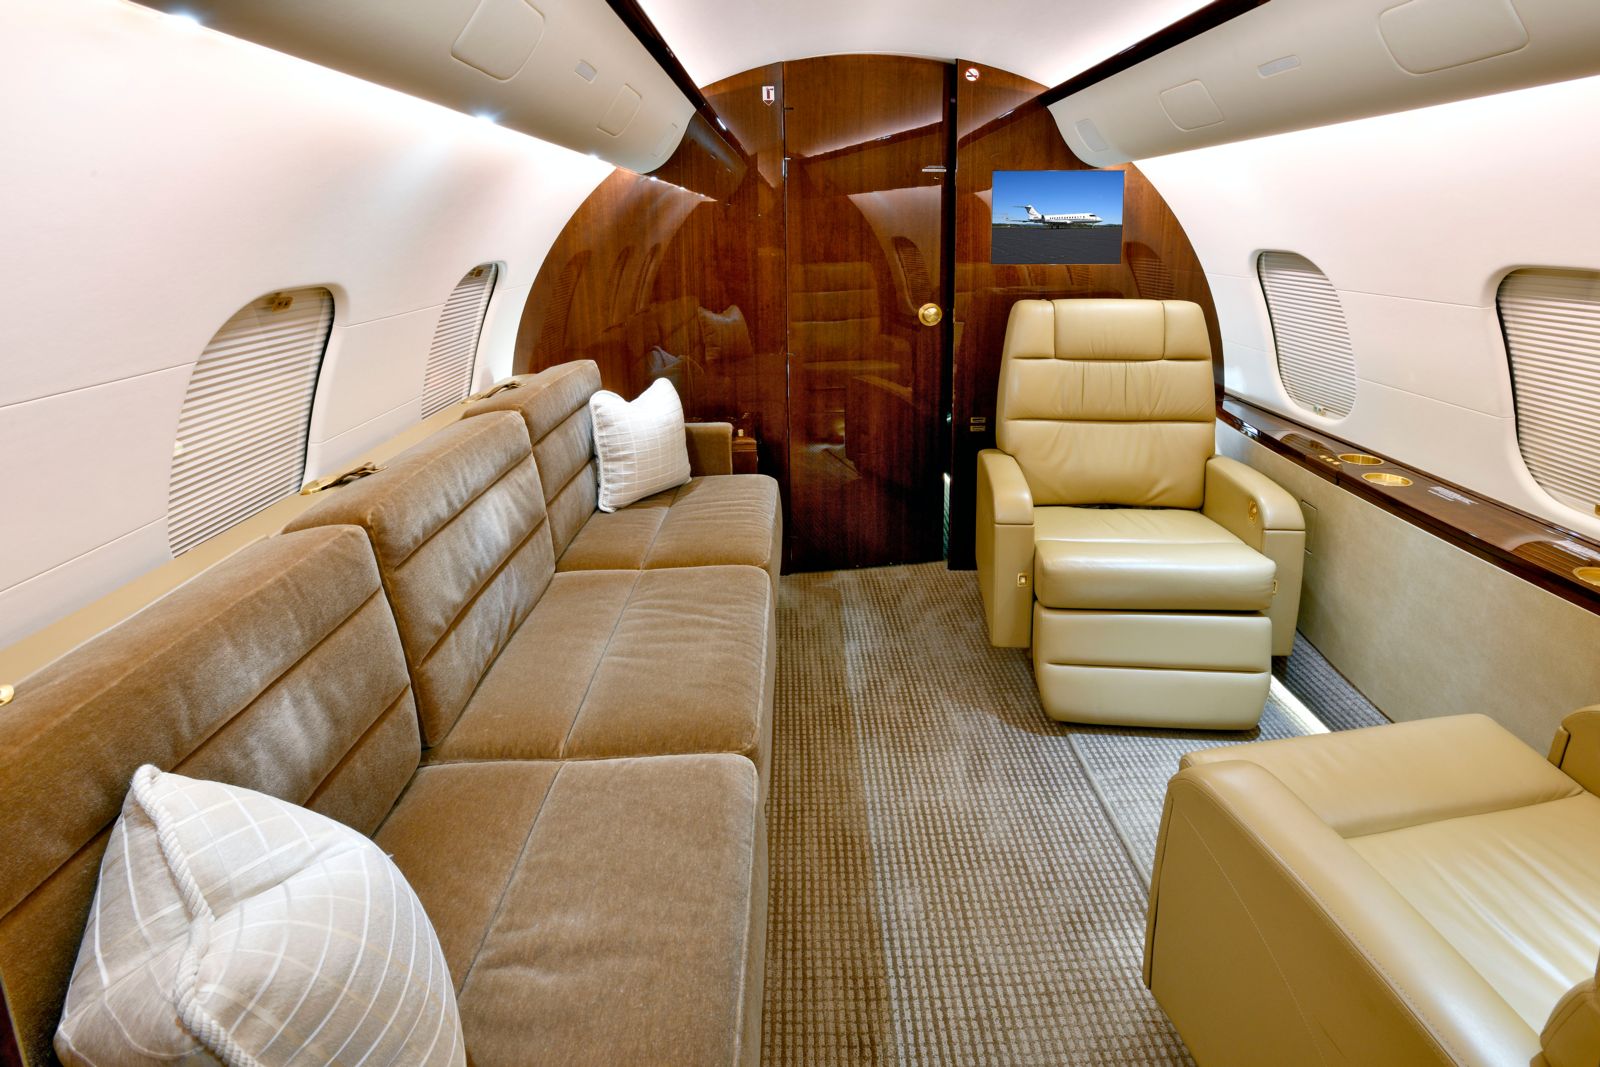 Bombardier Global 5000  S/N 9366 for sale | gallery image: /userfiles/images/G5000_sn9366/aft%20aft.jpg